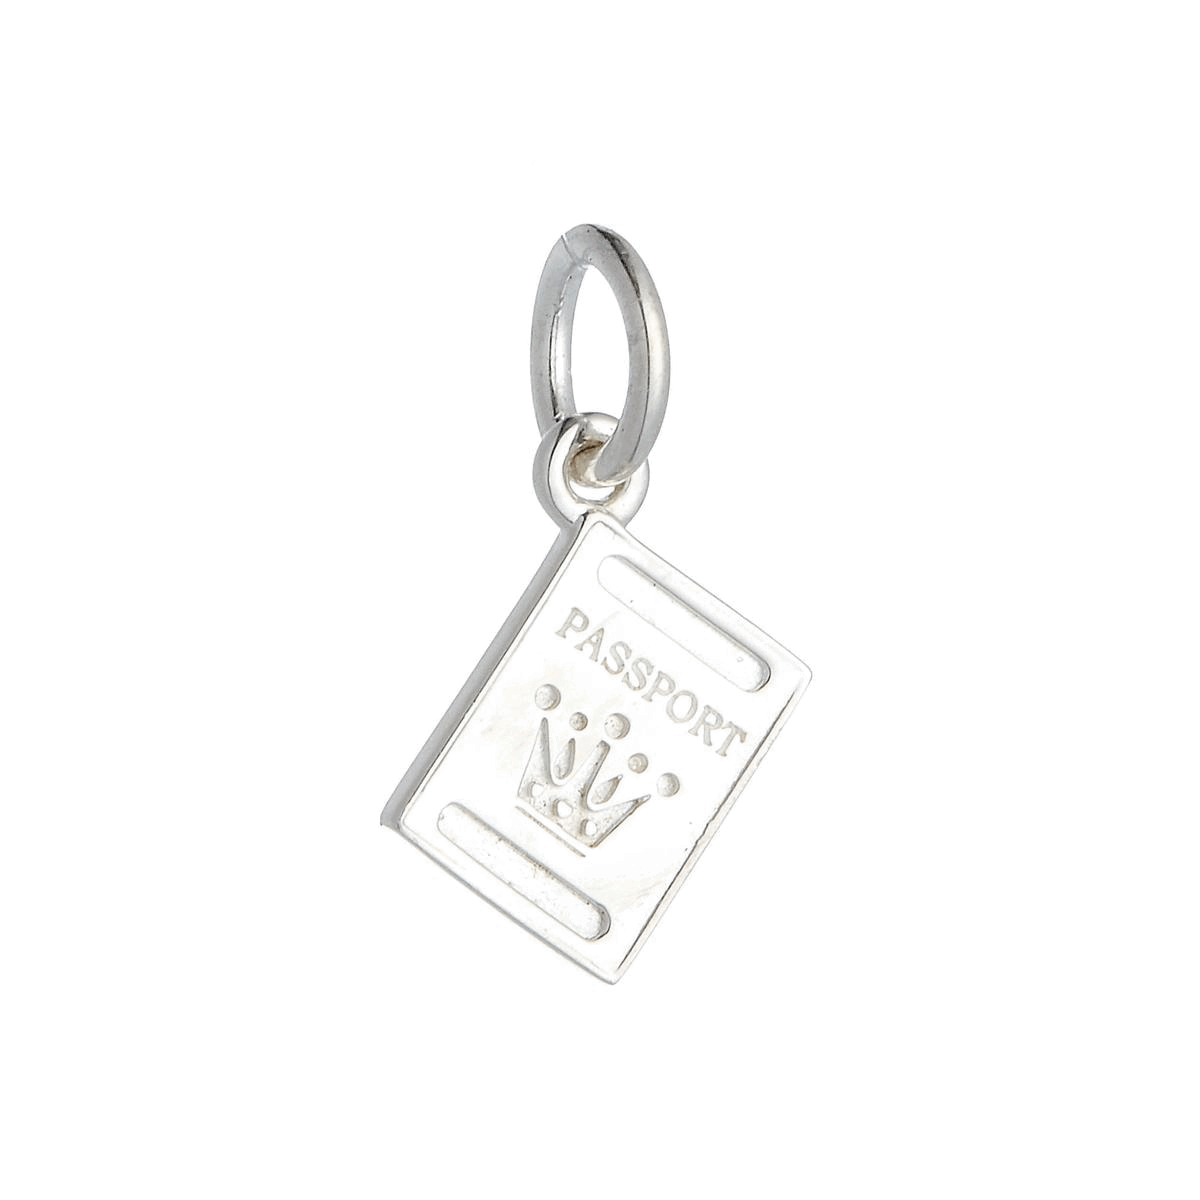 silver engraved passport charm for bracelet or necklace